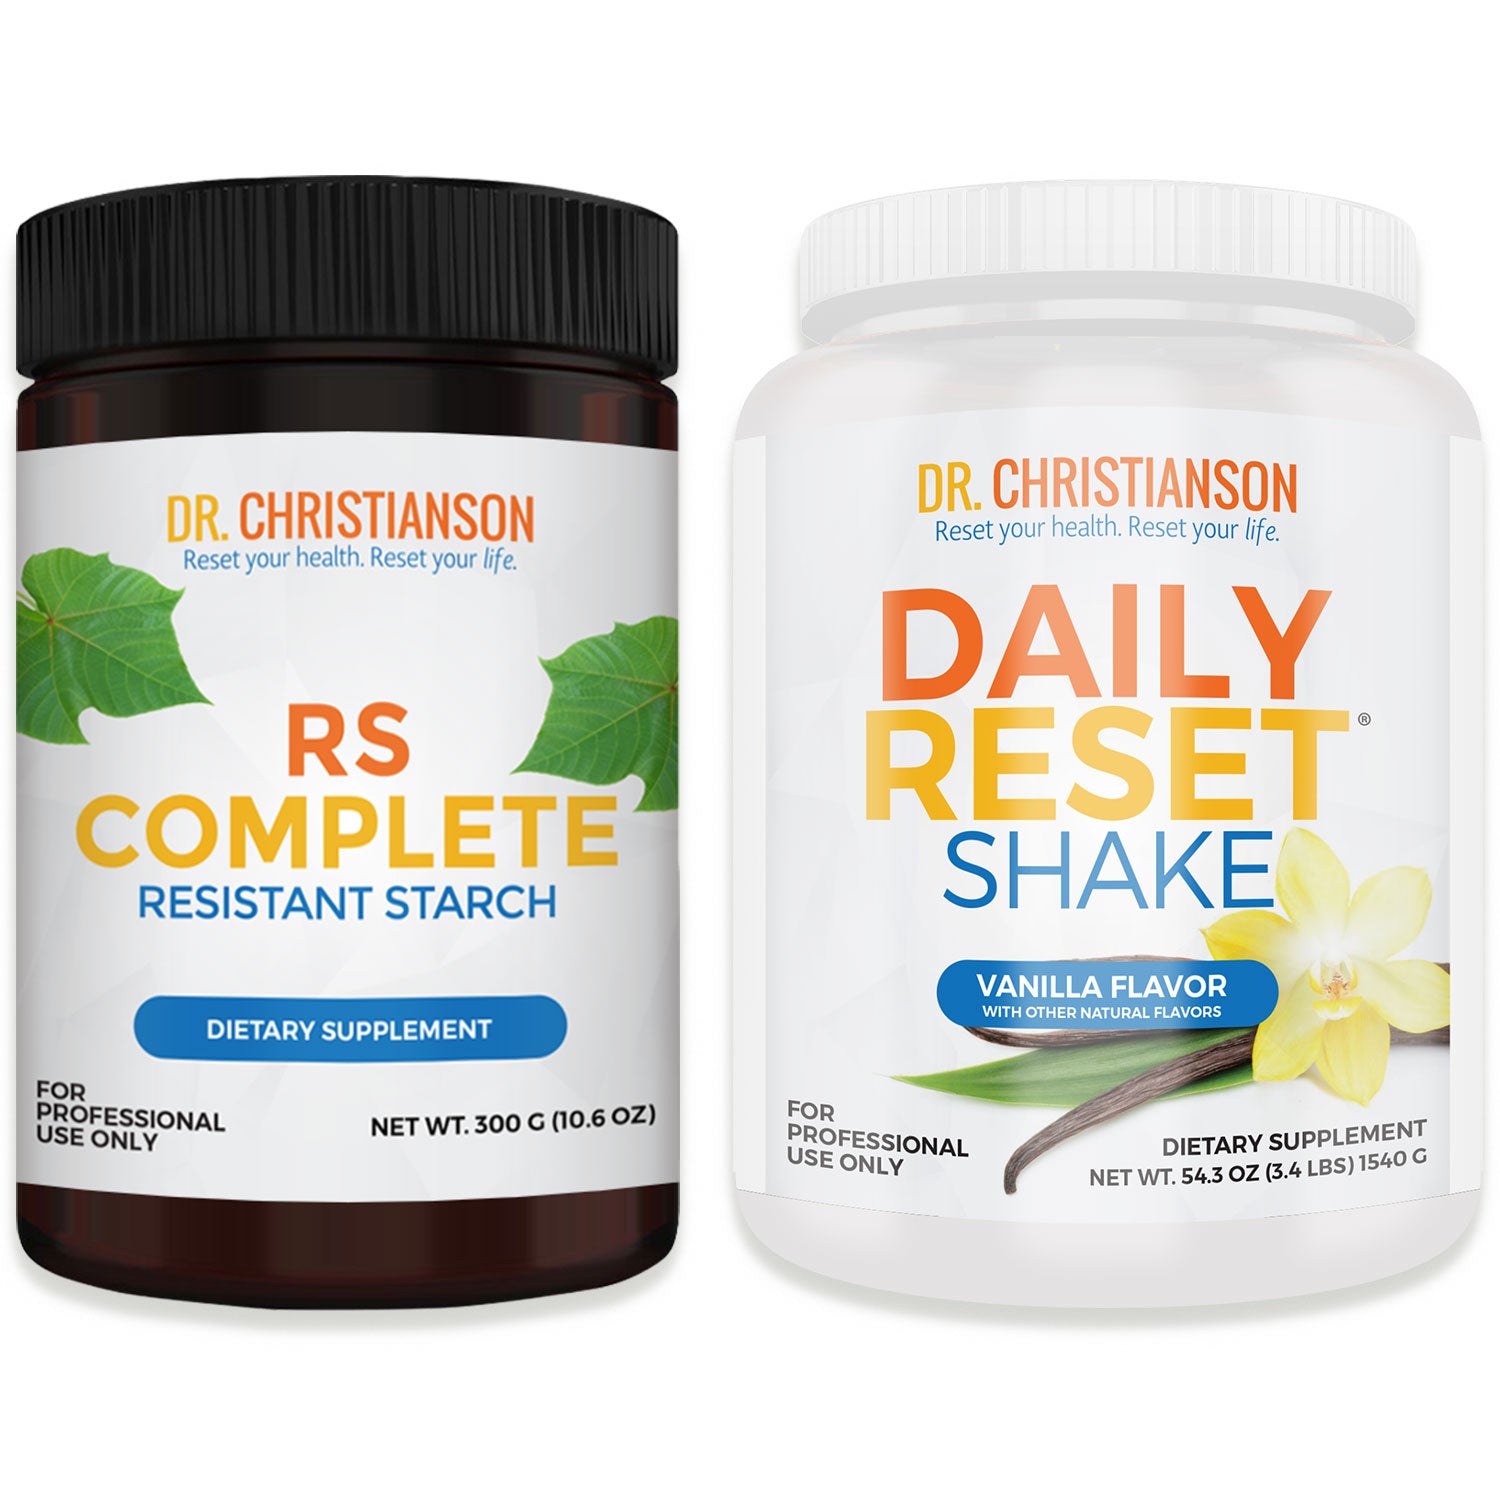 Daily Reset Shake and RS Complete MRD Challenge Bundle - CHOCOLATE IS OUT OF STOCK